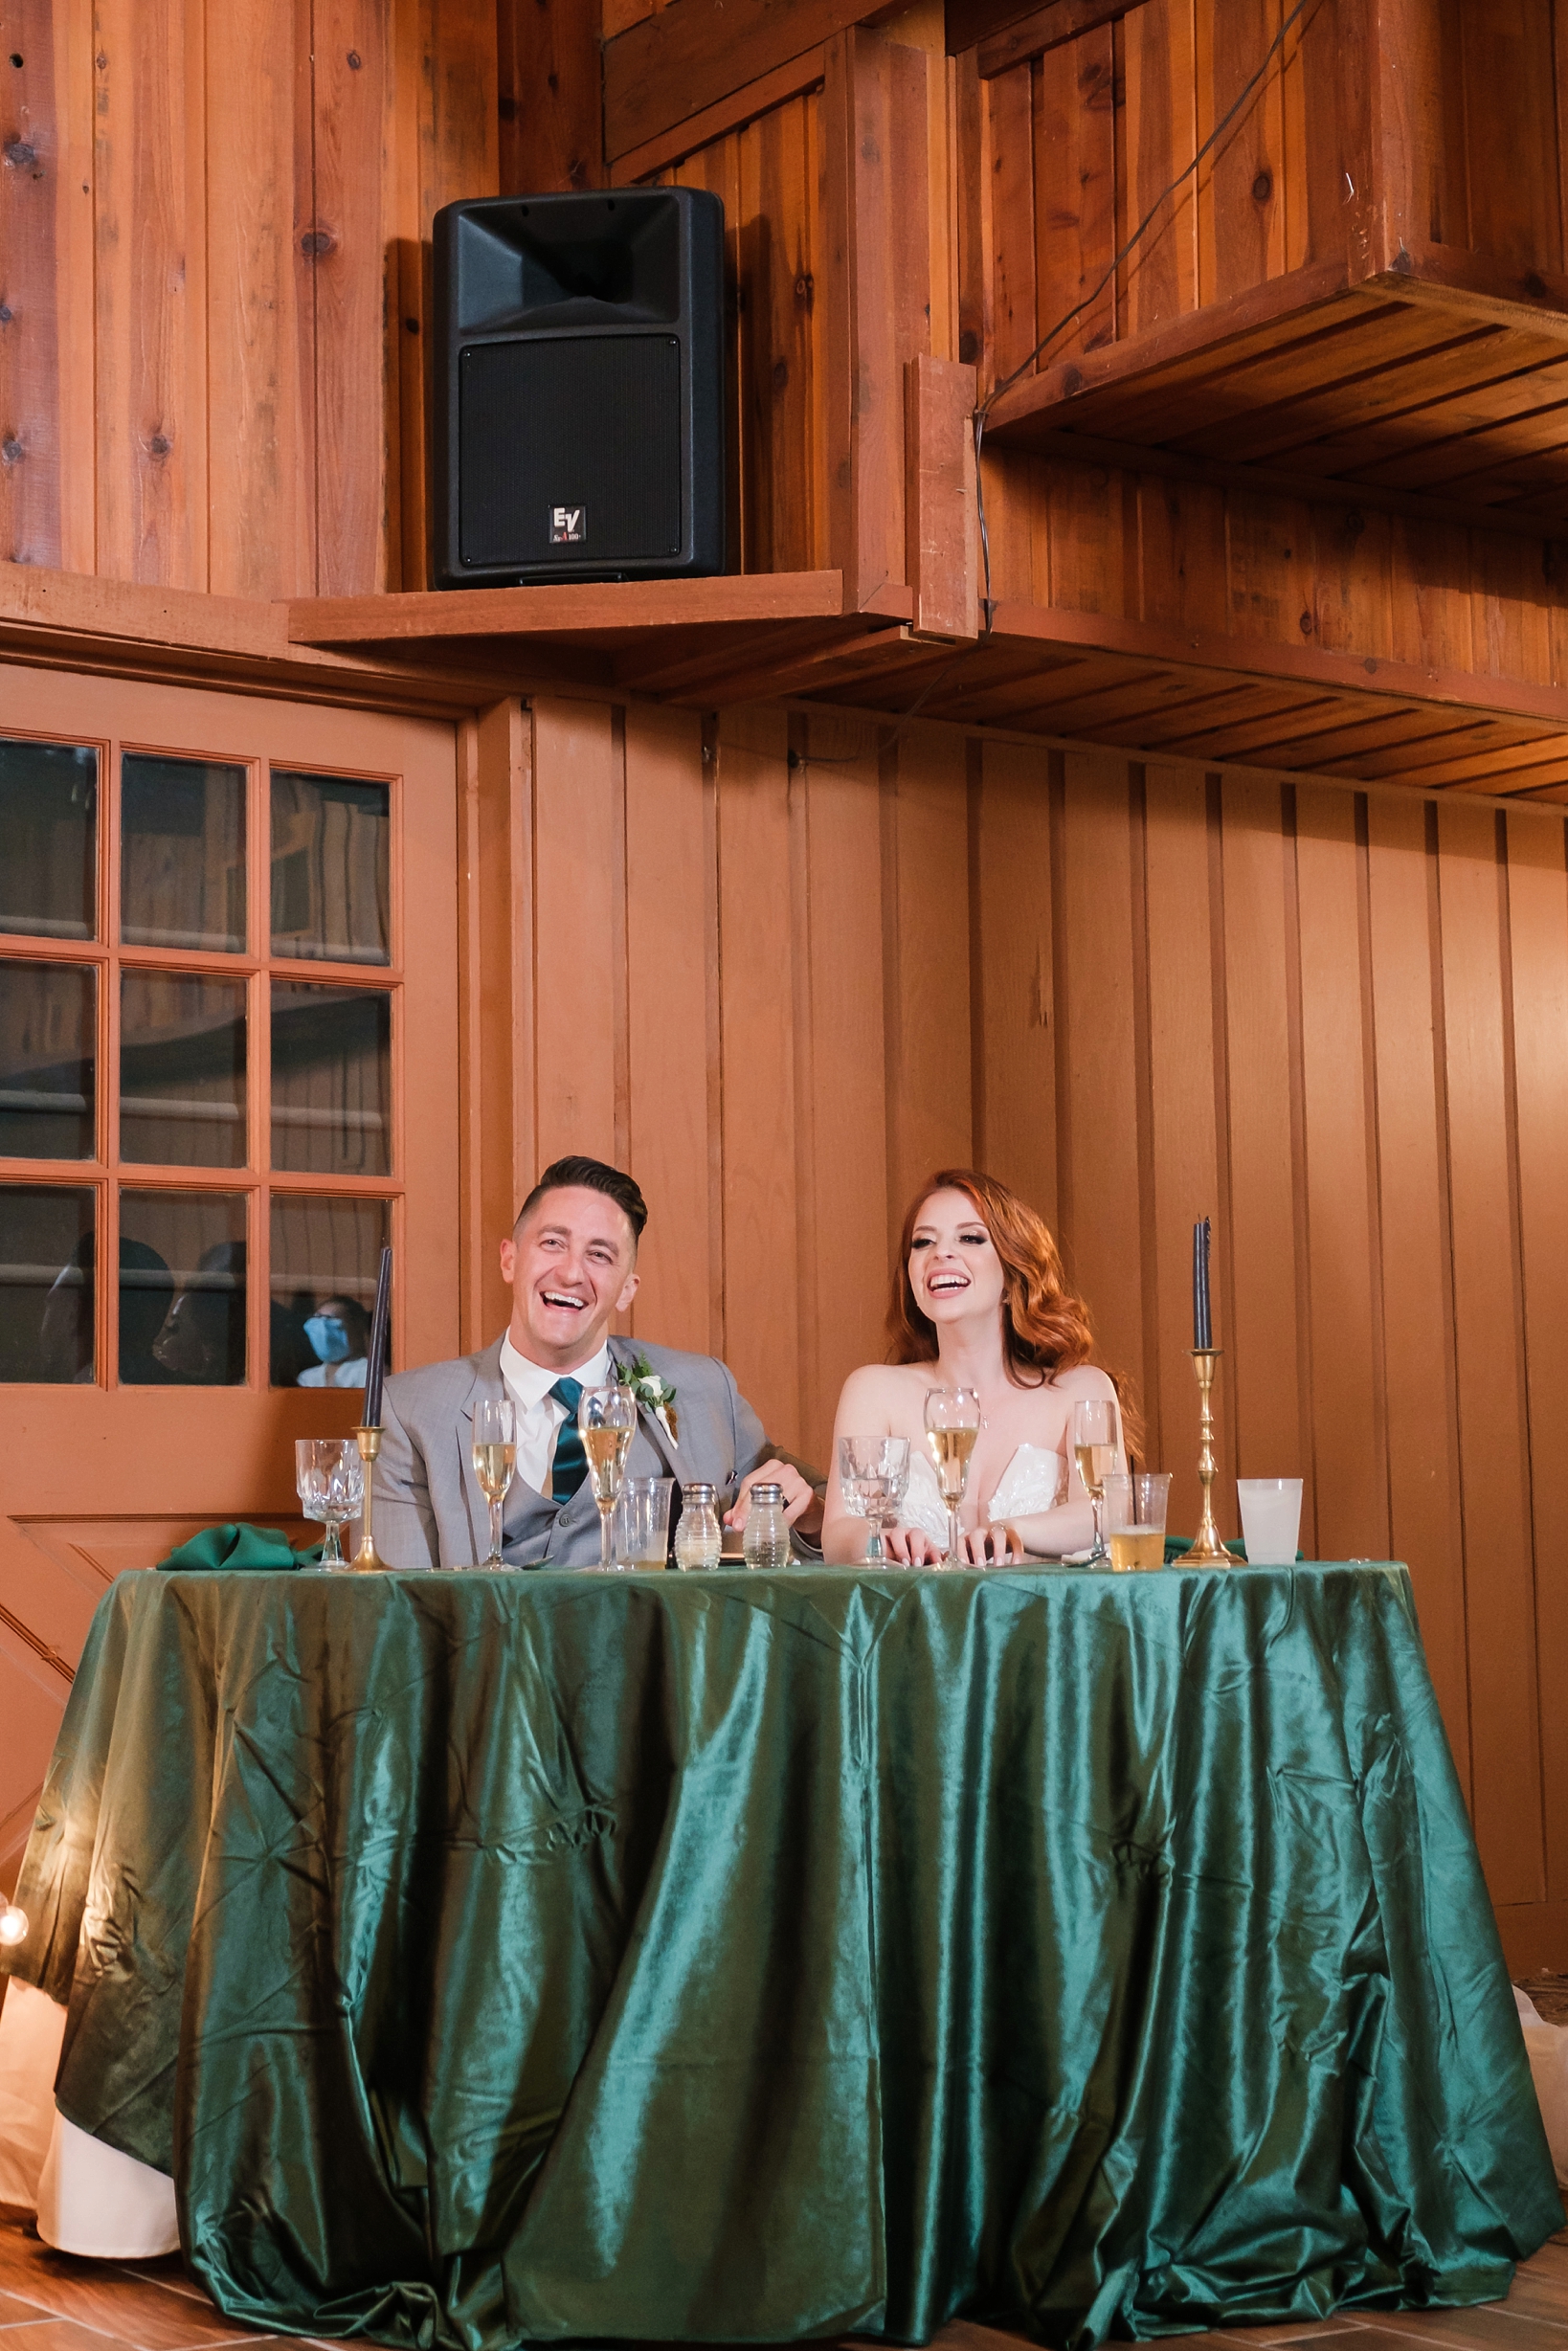 The Bride and Groom laughing during the speeches from their wedding party